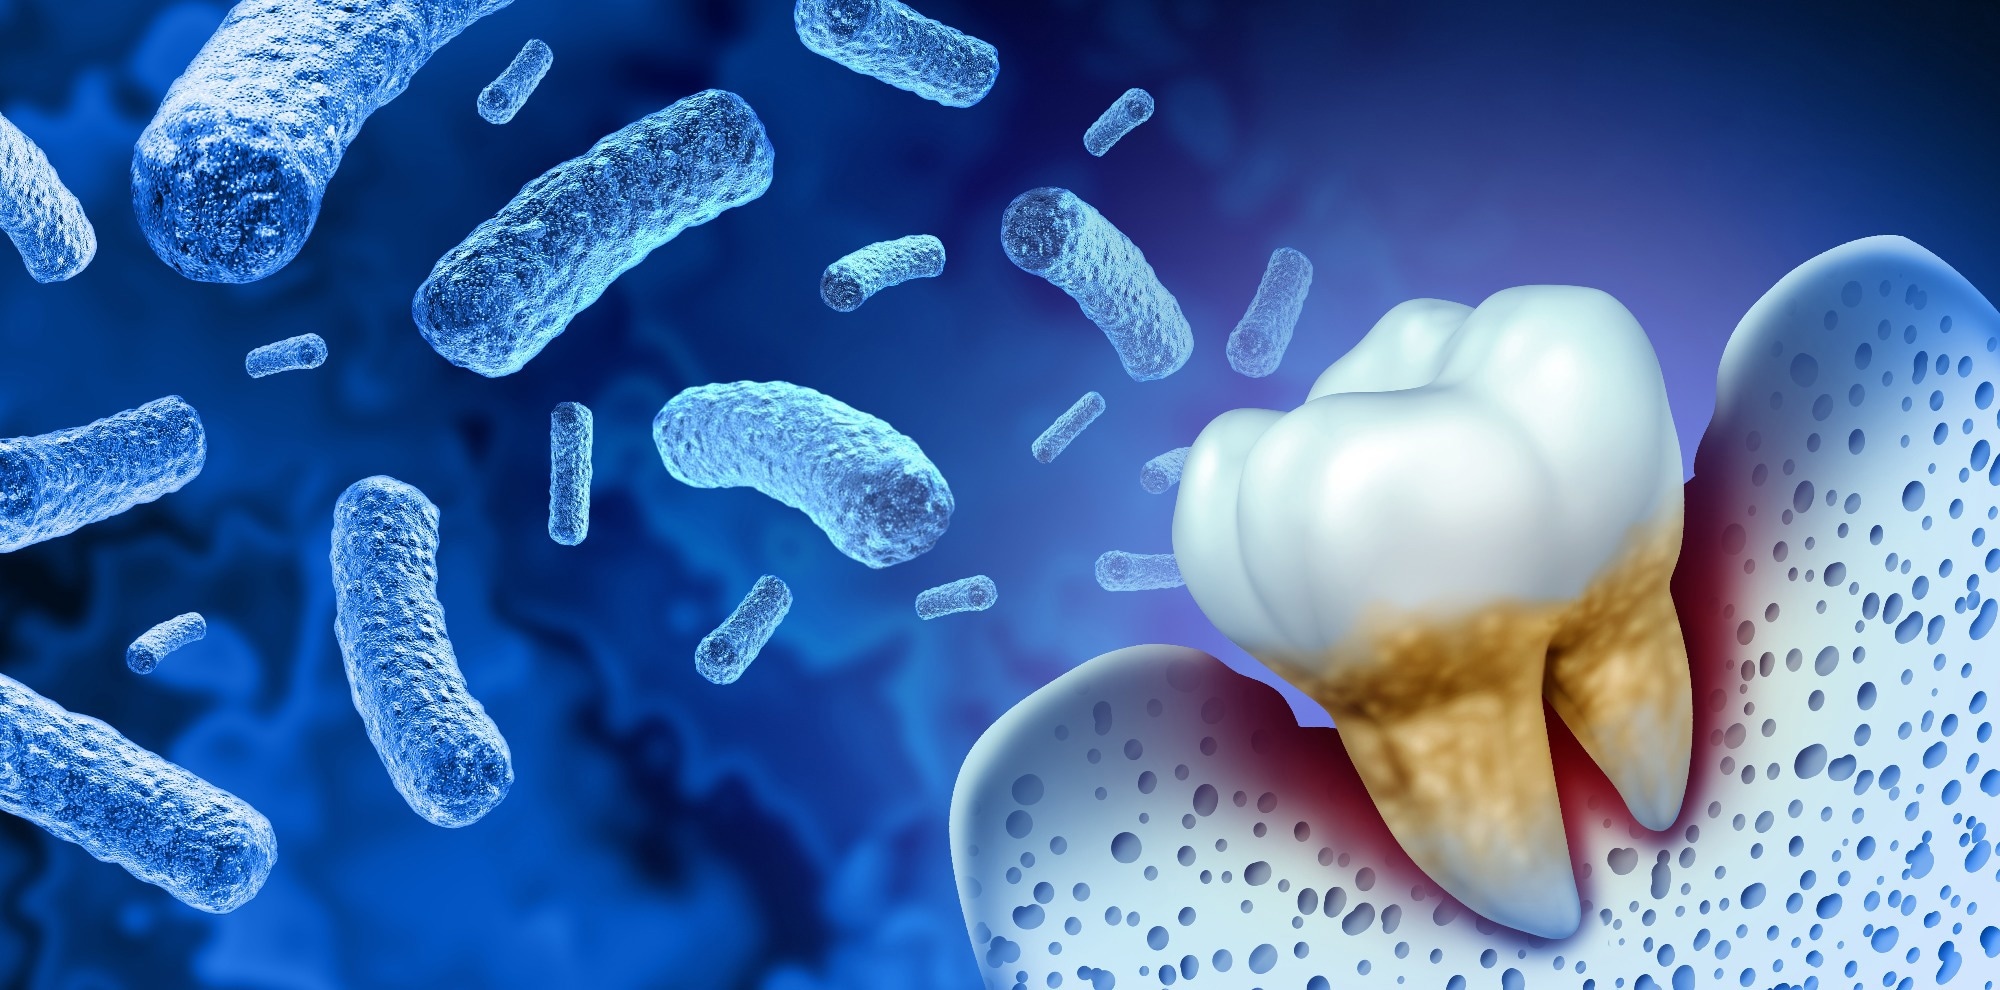 How could probiotics be used in the management of gingivitis and periodontitis?